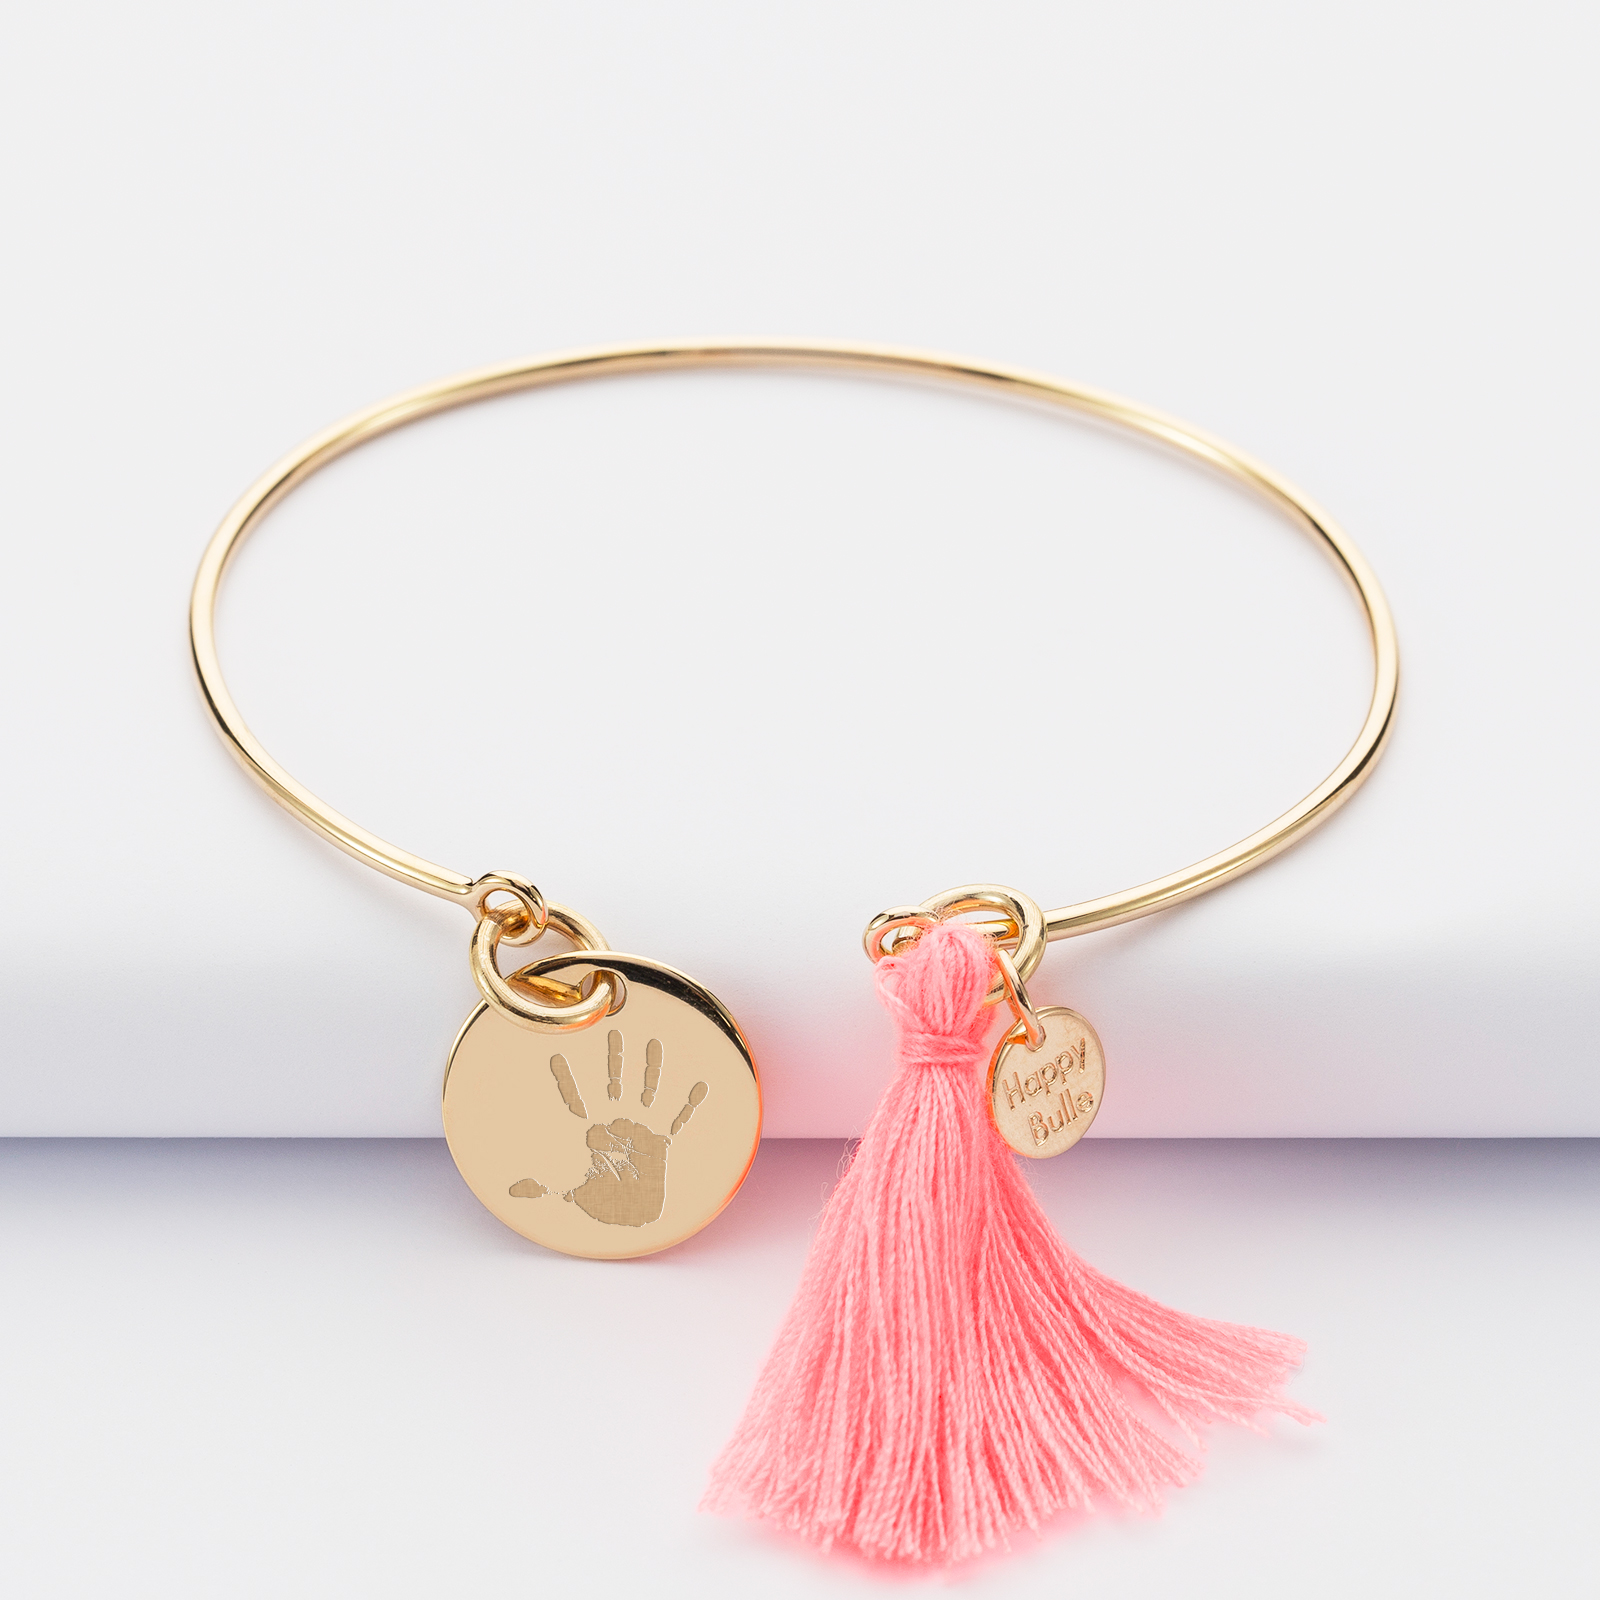 Personalised gold plate bangle with tassel and 15mm engraved medallion imprint